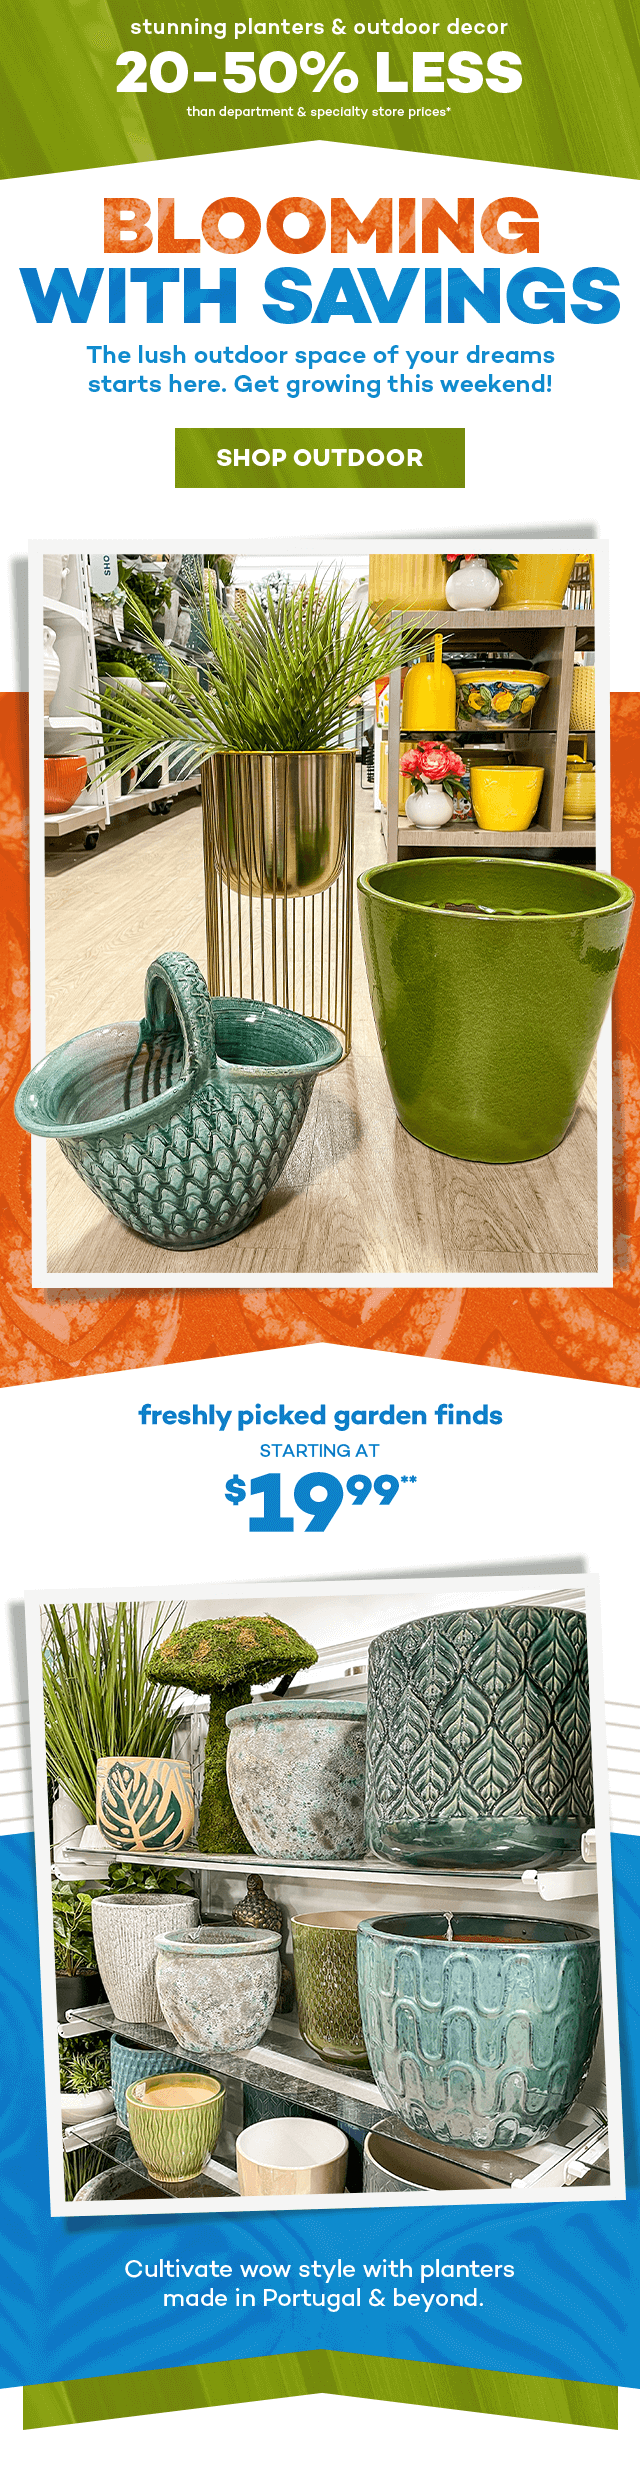 Stunning planters and outdoor decor. 20 to 50 percent less than department and specialty store prices.* Blooming with savings. The lush outdoor space of your dreams starts here. Get growing this weekend! Shop Outdoor. Freshly picked garden finds starting at $19.99.** Cultivate wow style with planters made in portugal and beyond.